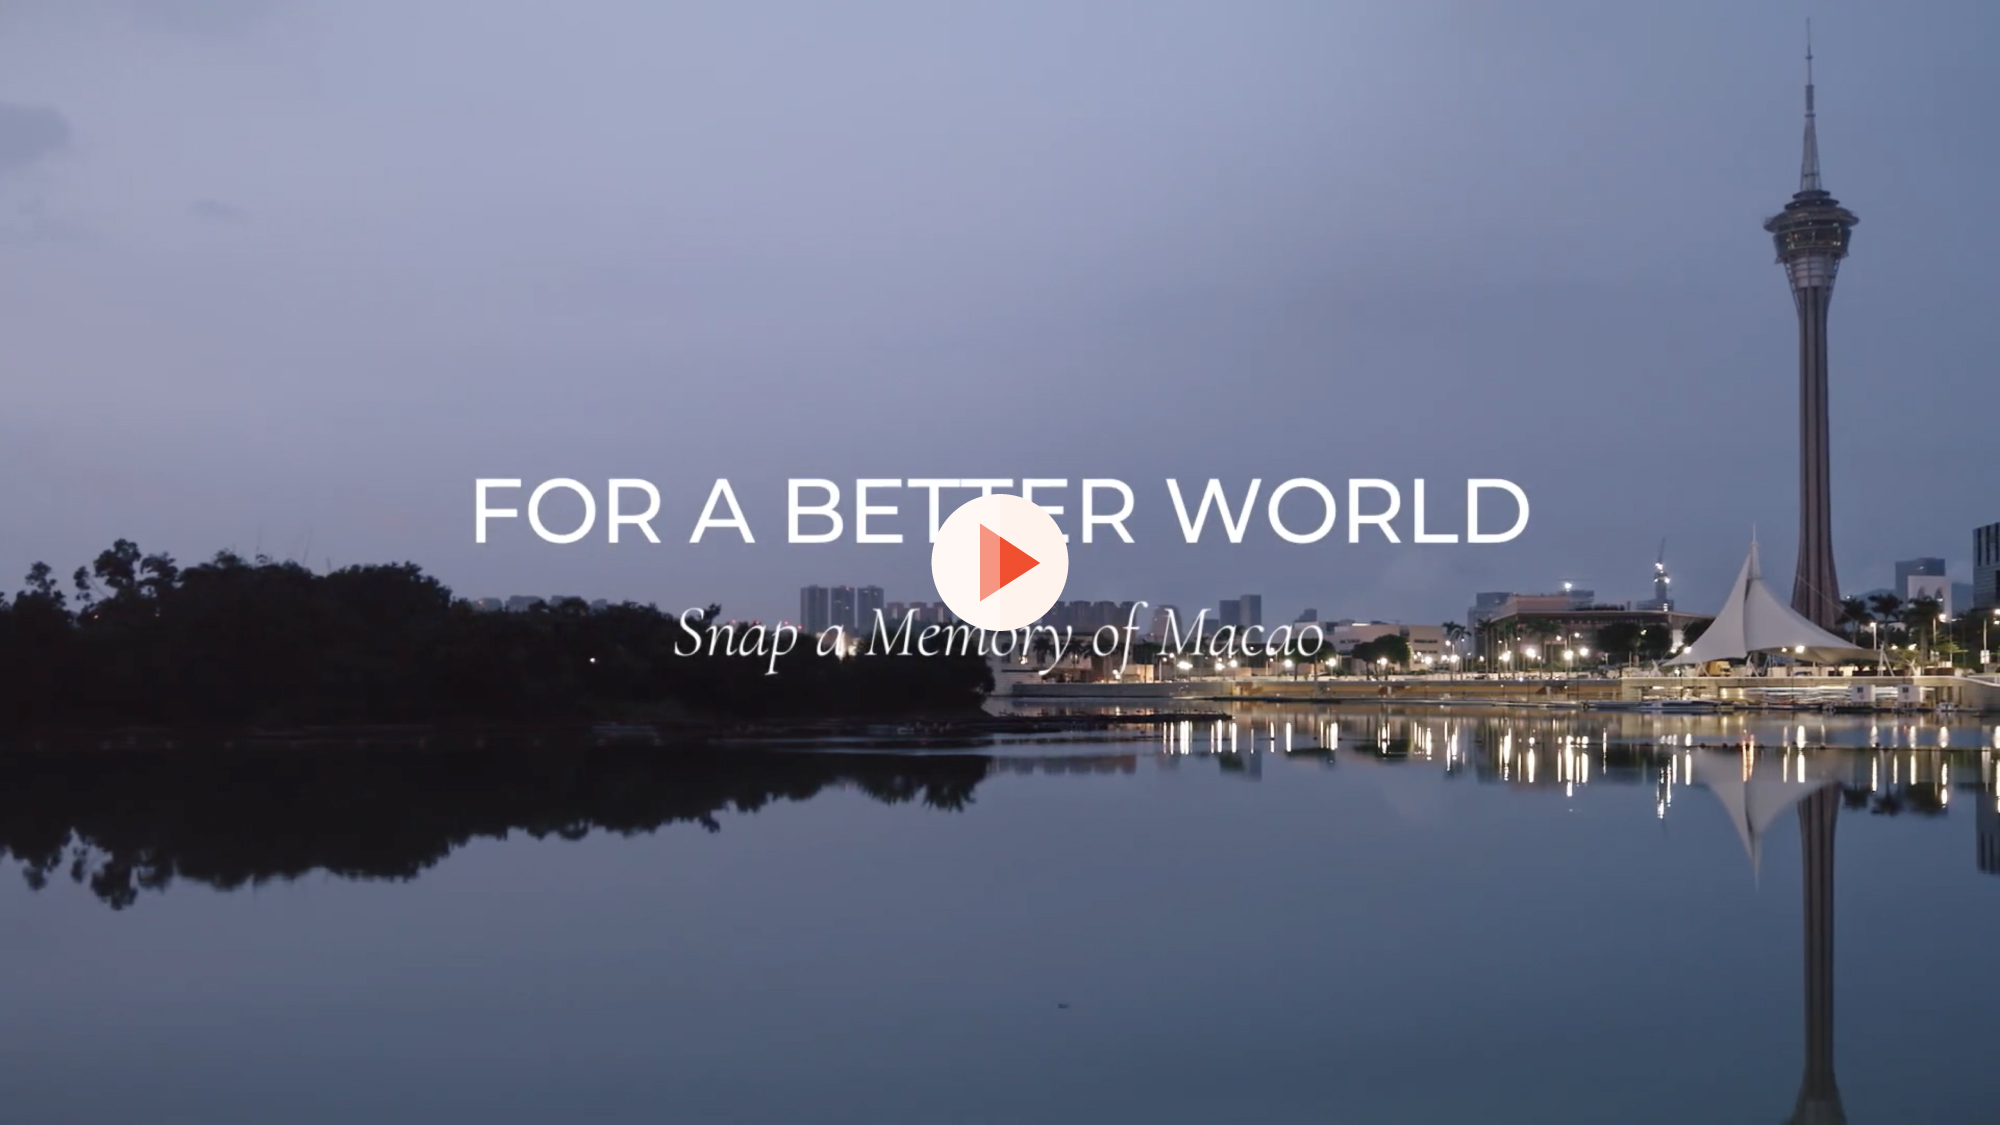 For a better world: Snap a memory of Macao